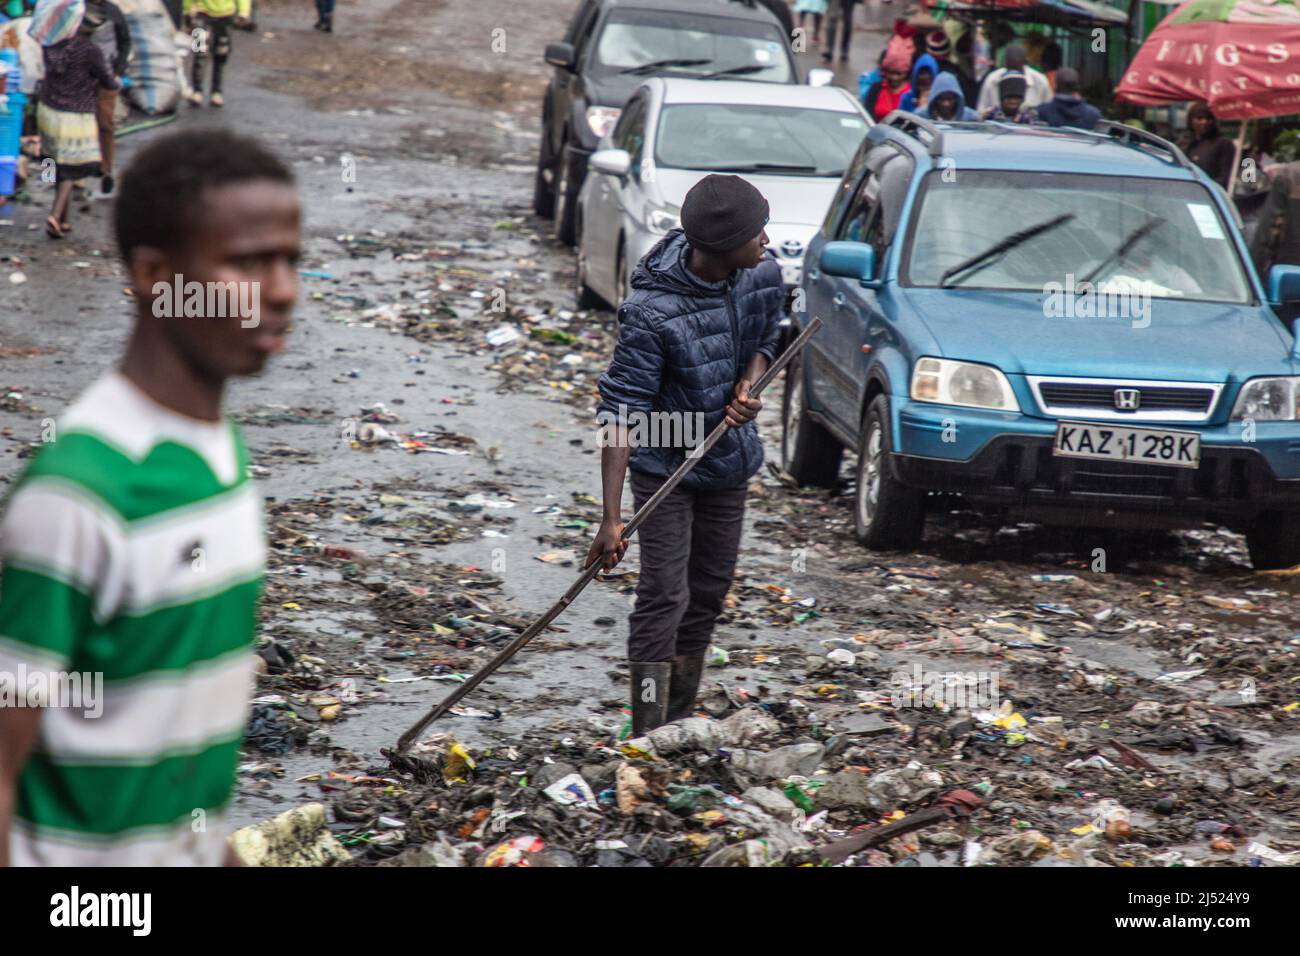 A boy pushing rubbish on the road after heavy rains rains in Kibera on April 18, 2022.  The rainy season brings relife to the drouhgt-hit areas, but for the residents of Kibera the rains can be a sign of the worst to come ( Photo by Samson Otieno/Sipa USA) Stock Photo